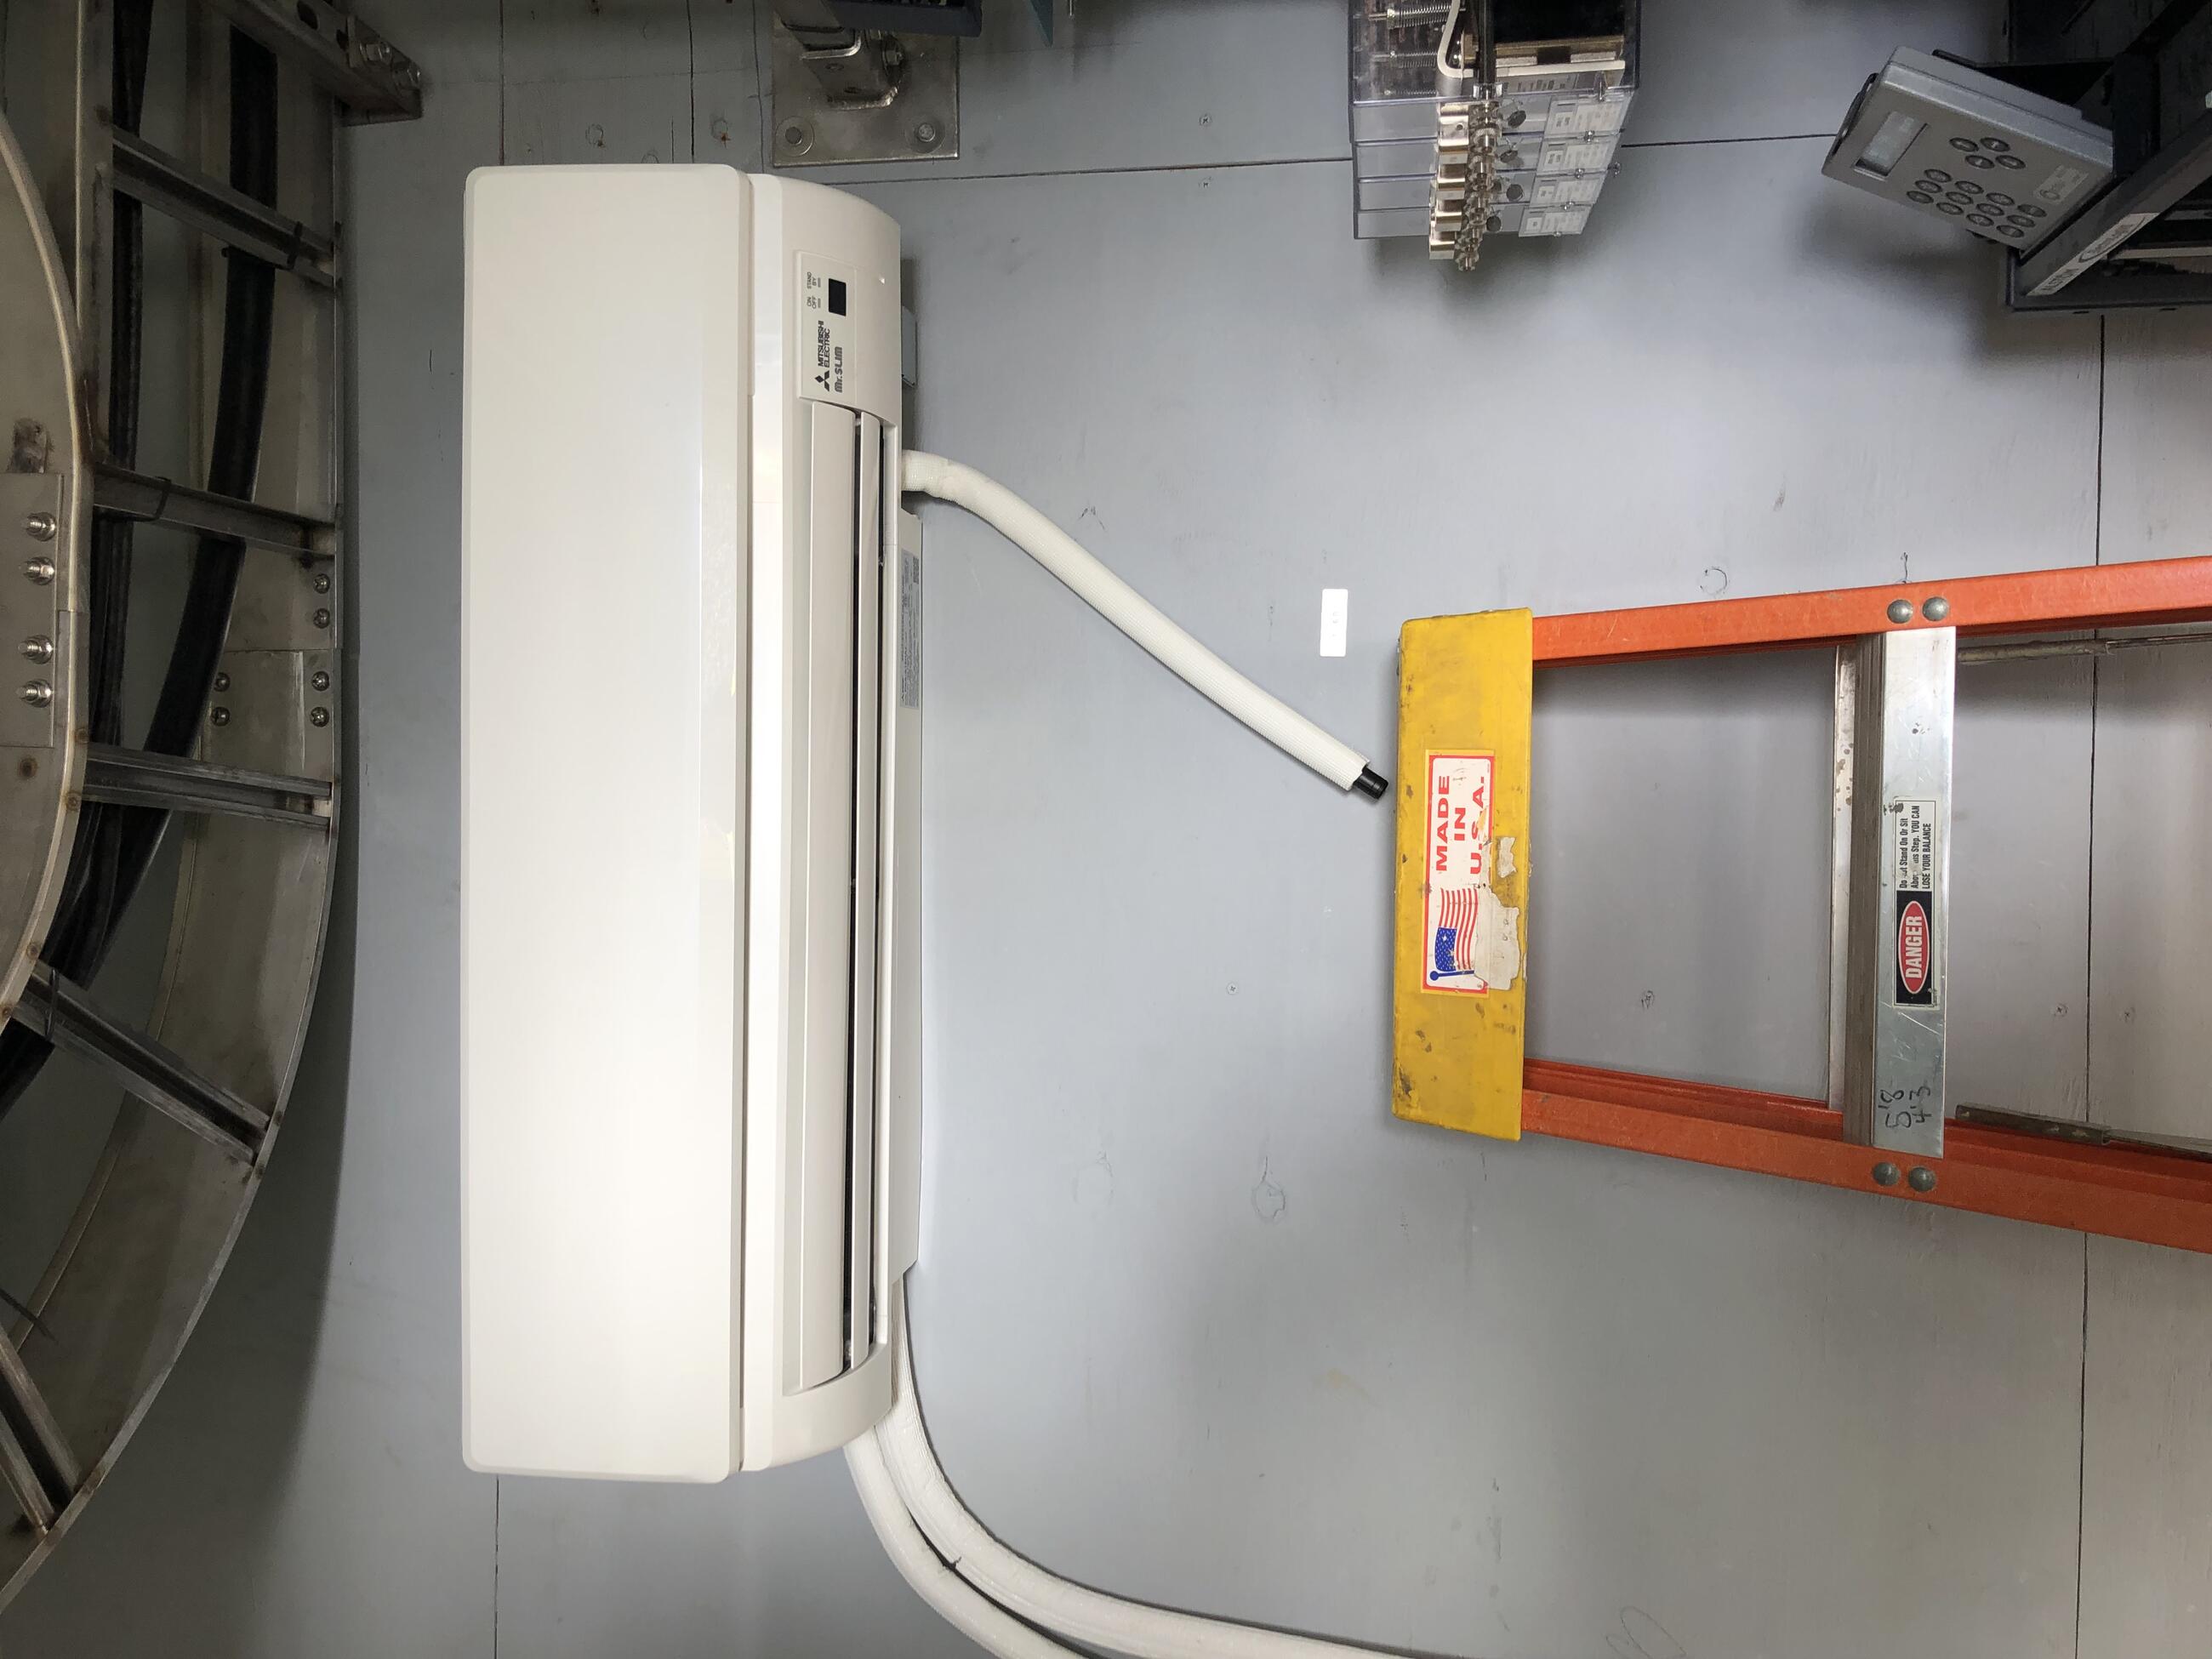 A ductless minisplit heater/cooler is shown attached to a wall of the control tower with a stepladder below it. 